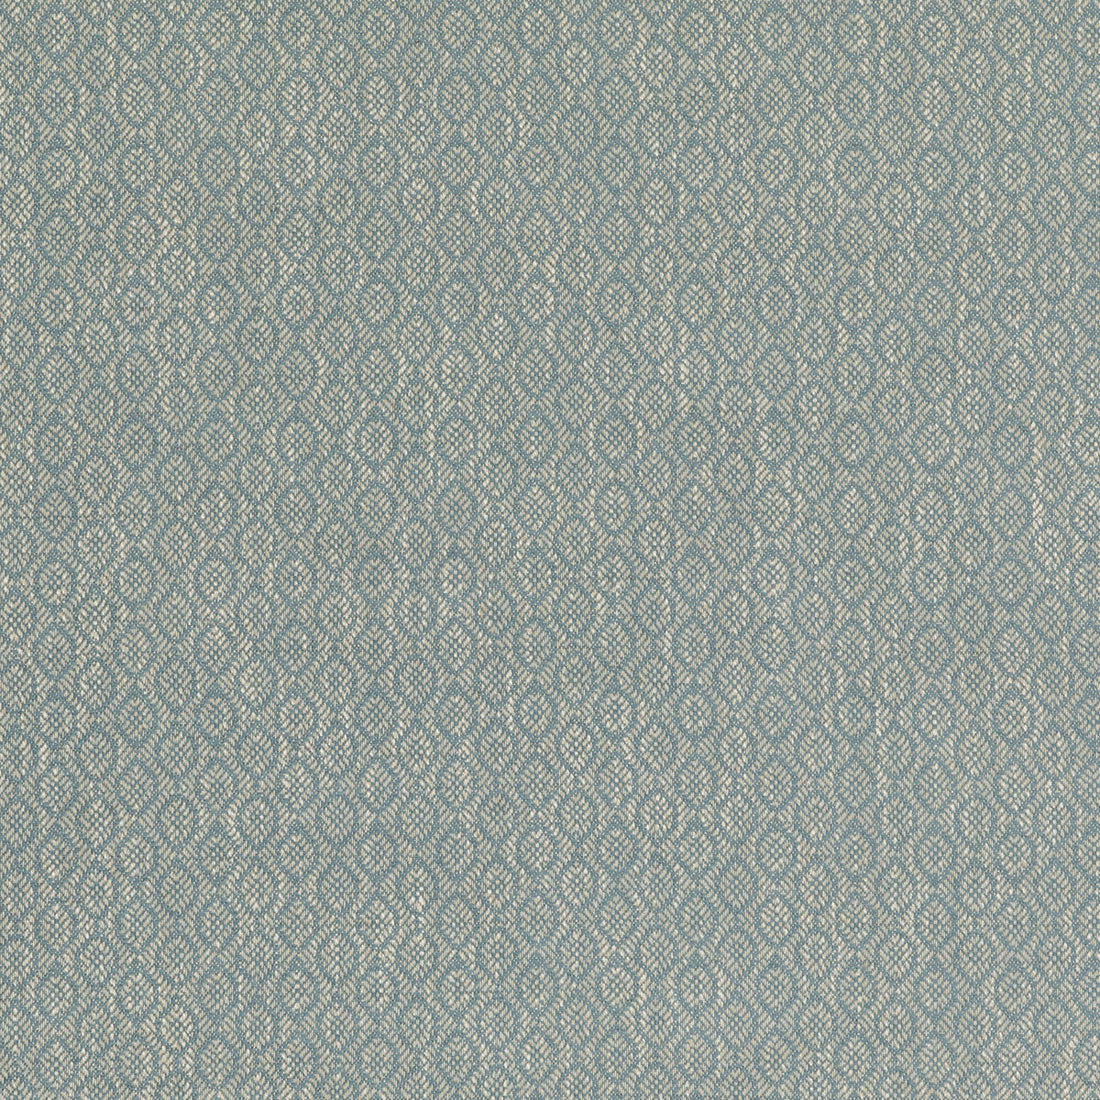 Orchard fabric in soft blue color - pattern PF50488.605.0 - by Baker Lifestyle in the Block Weaves collection